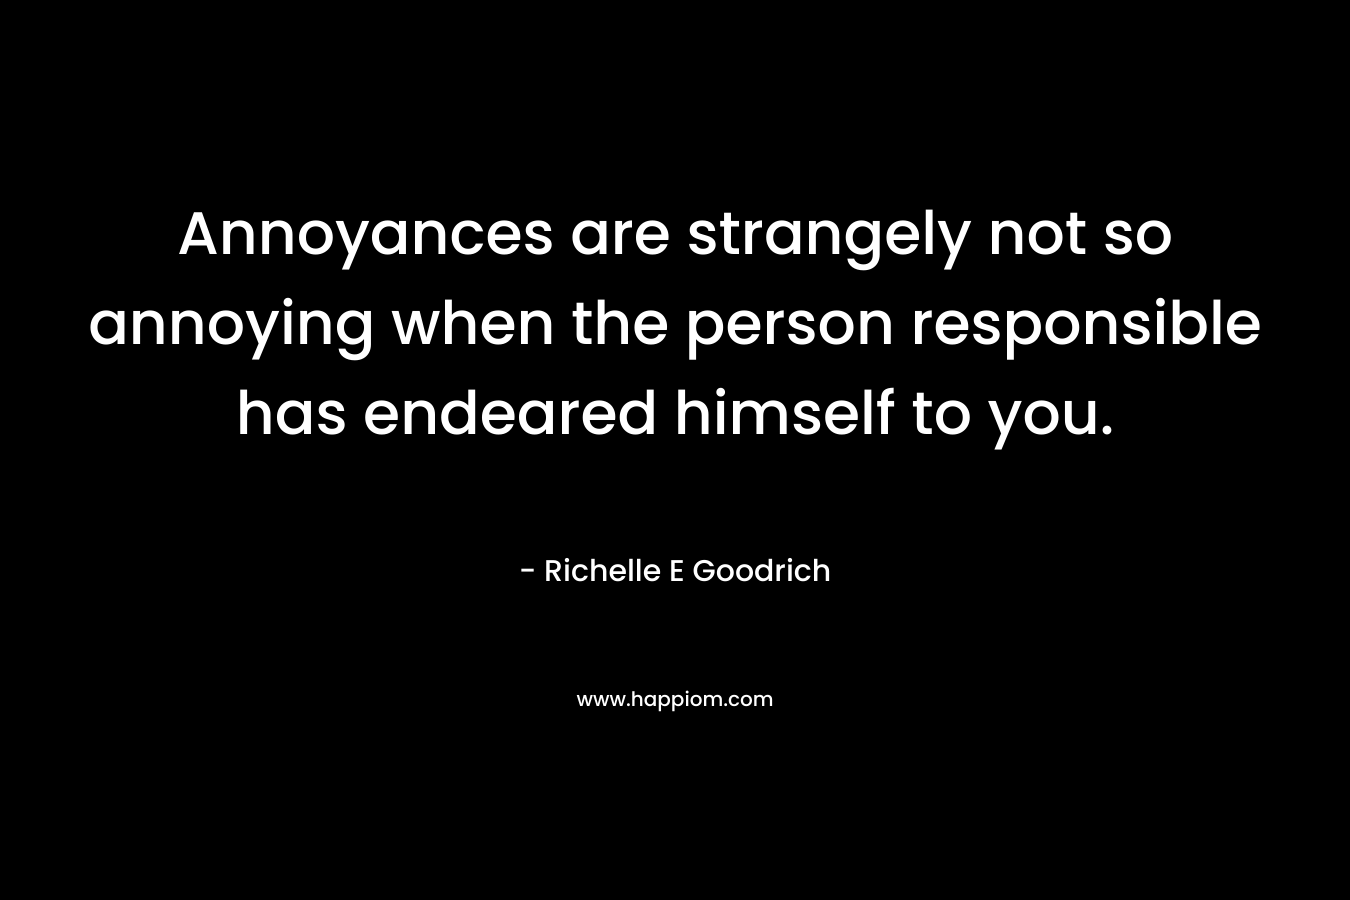 Annoyances are strangely not so annoying when the person responsible has endeared himself to you. – Richelle E Goodrich